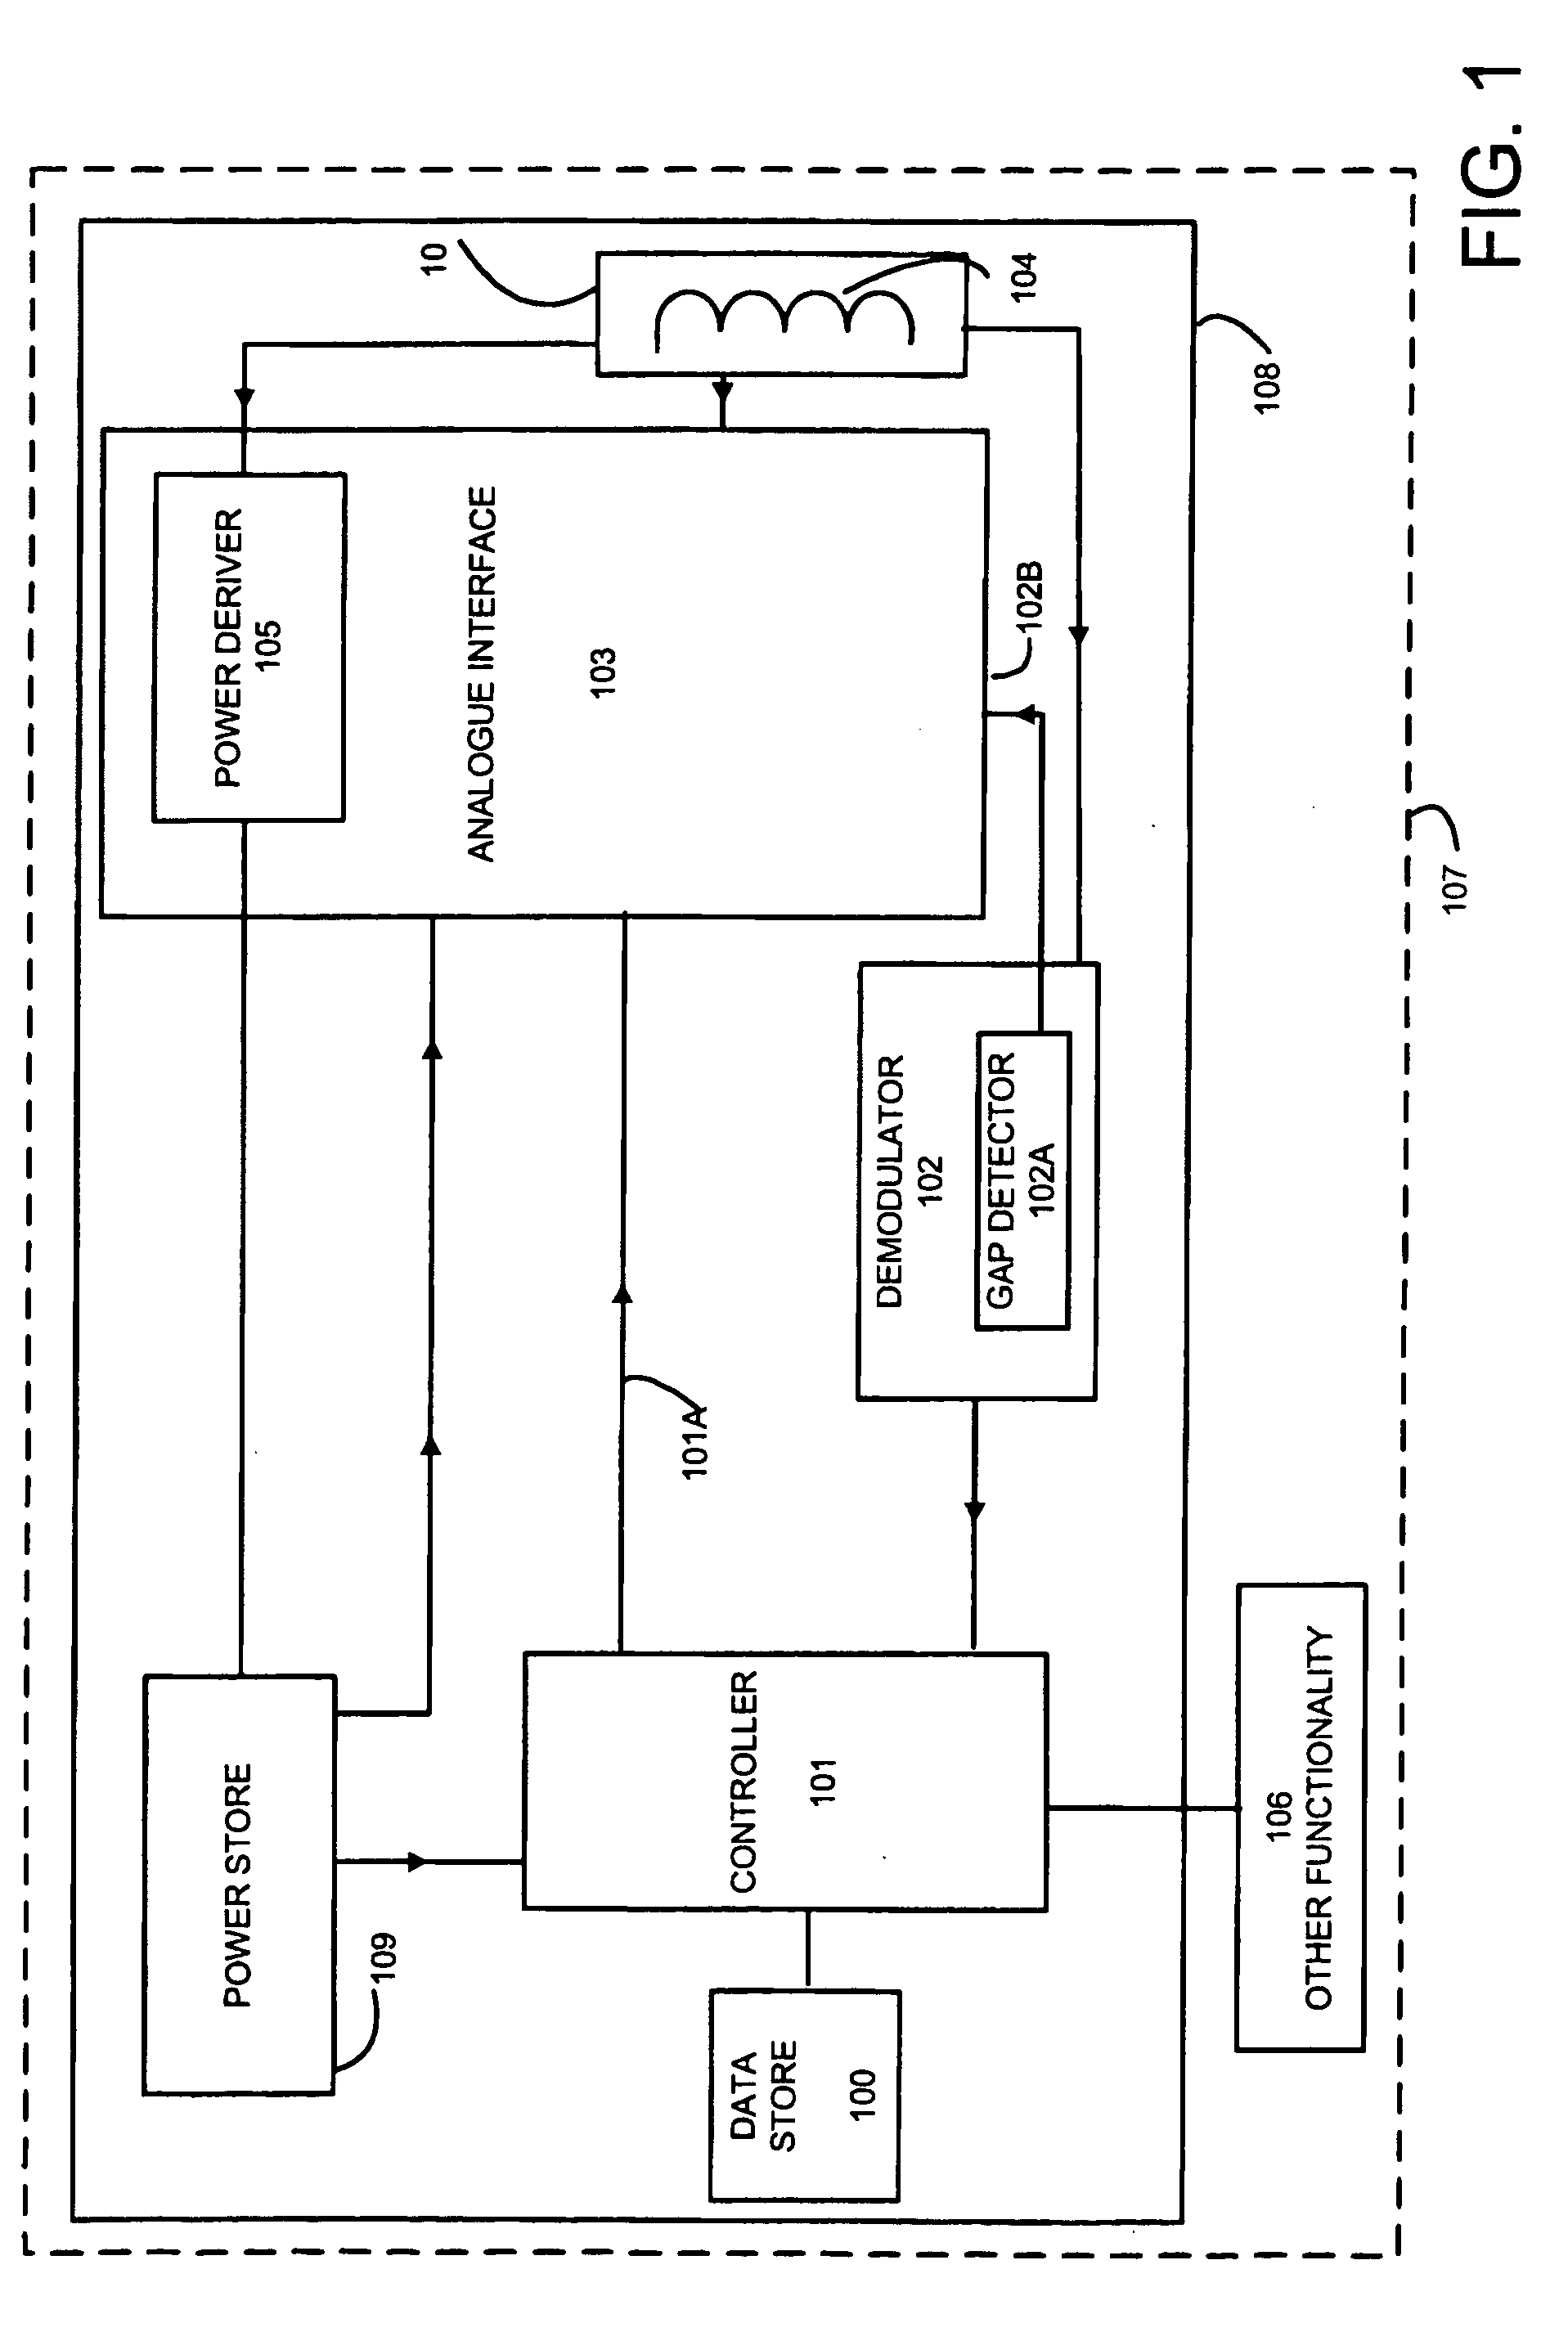 Near field RF communicators and near field communications-enabled devices